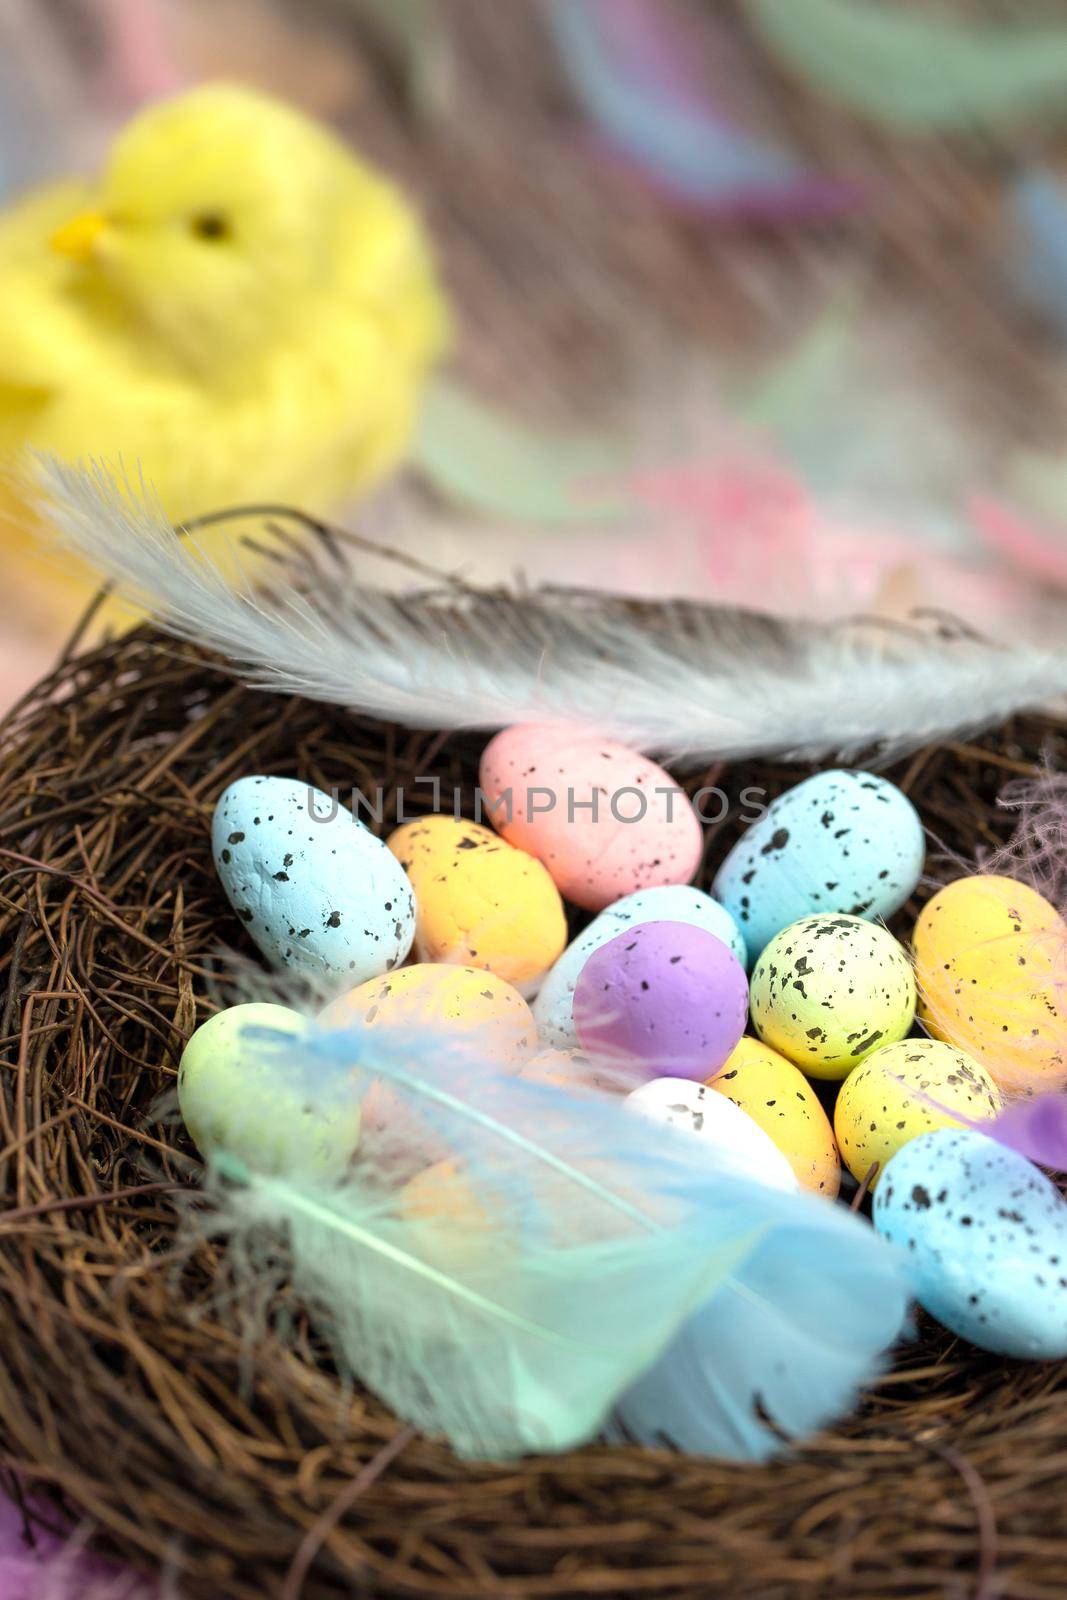 Easter eggs in a bird's nest pastel colores, Easter, spring, Nature concept background macro with colorful feathers on the background yellow chicks